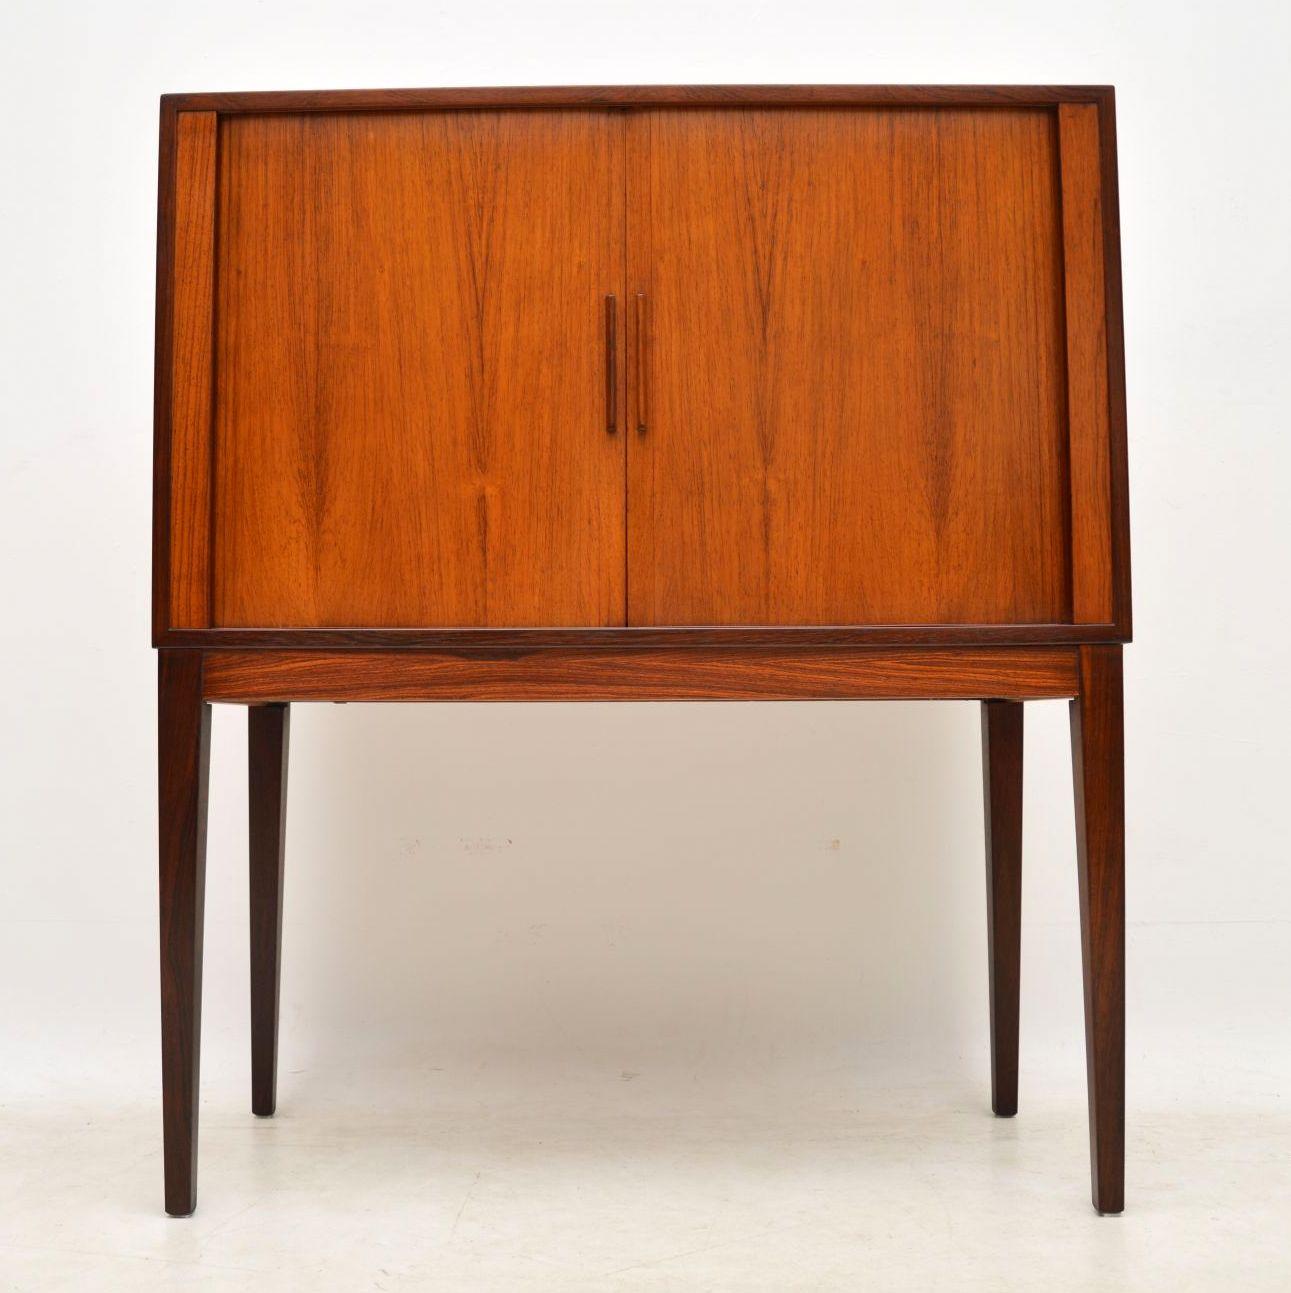 A stylish and top quality drinks cabinet made in Denmark, it dates from the 1960s. It’s a nice compact size, the legs can be detached if need be. We have had this stripped and re-polished to a very high standard, the condition is superb